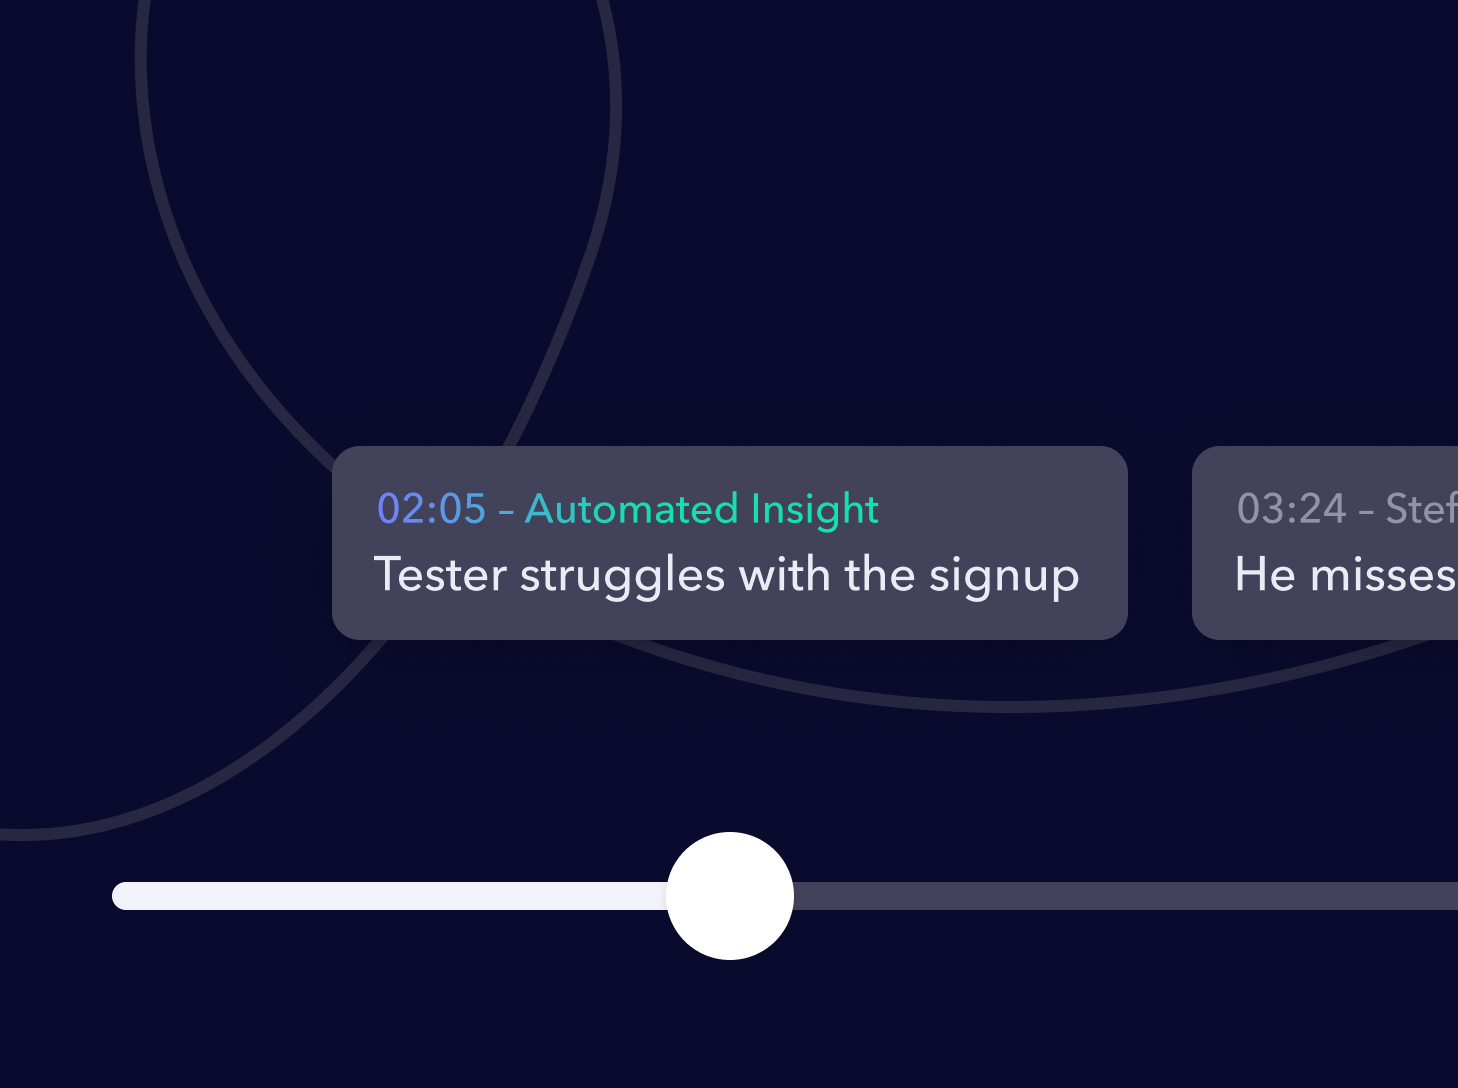 Userbrain Player with an AI generated insight displayed above the timeline